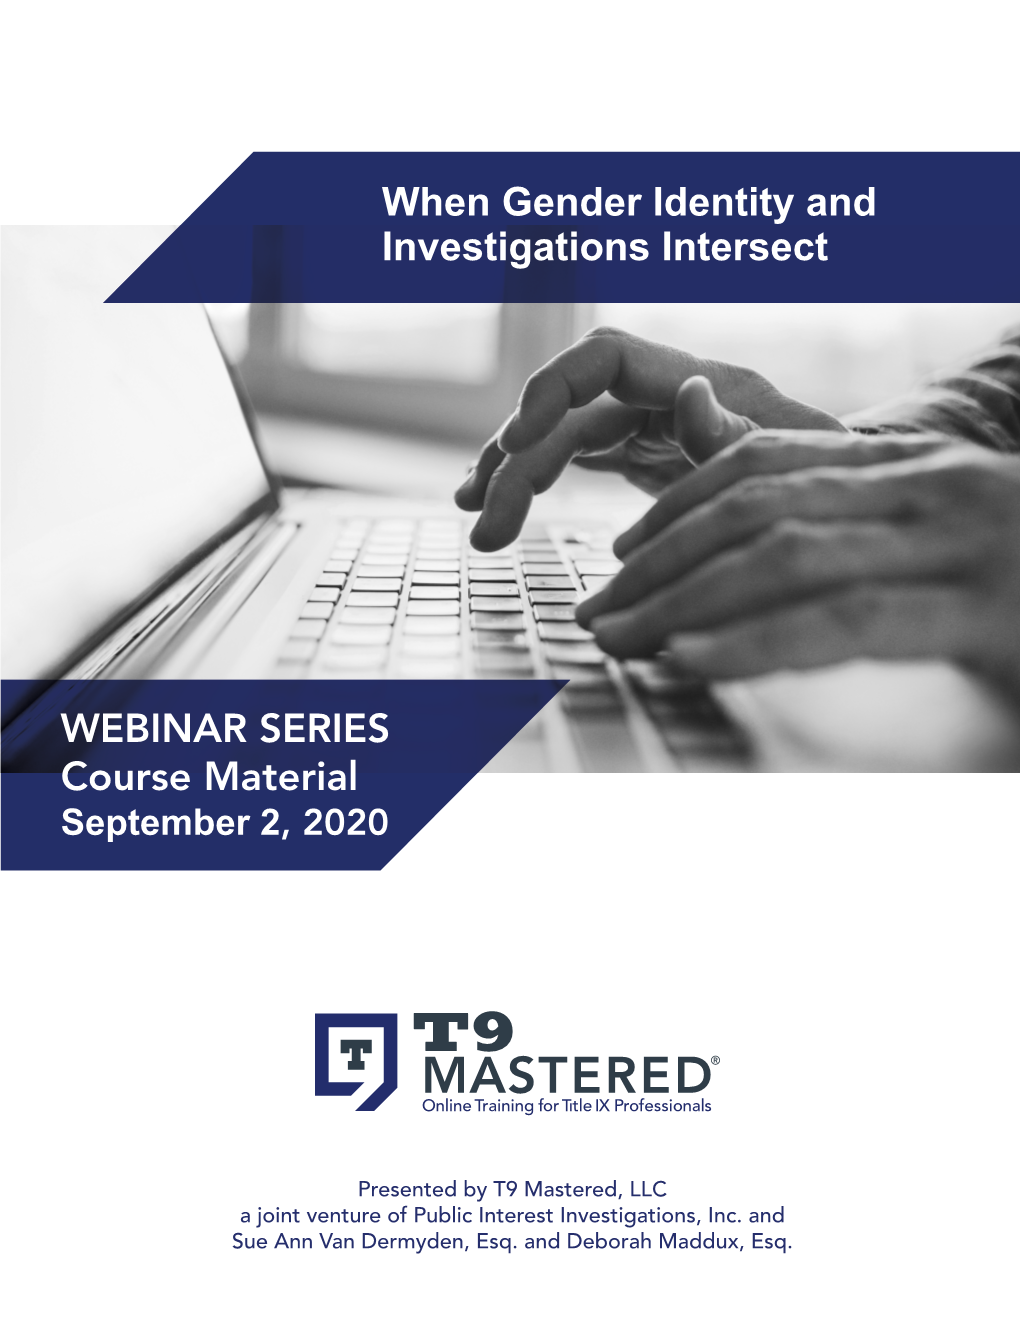 When Gender Identity and Investigations Intersect WEBINAR SERIES Course Material